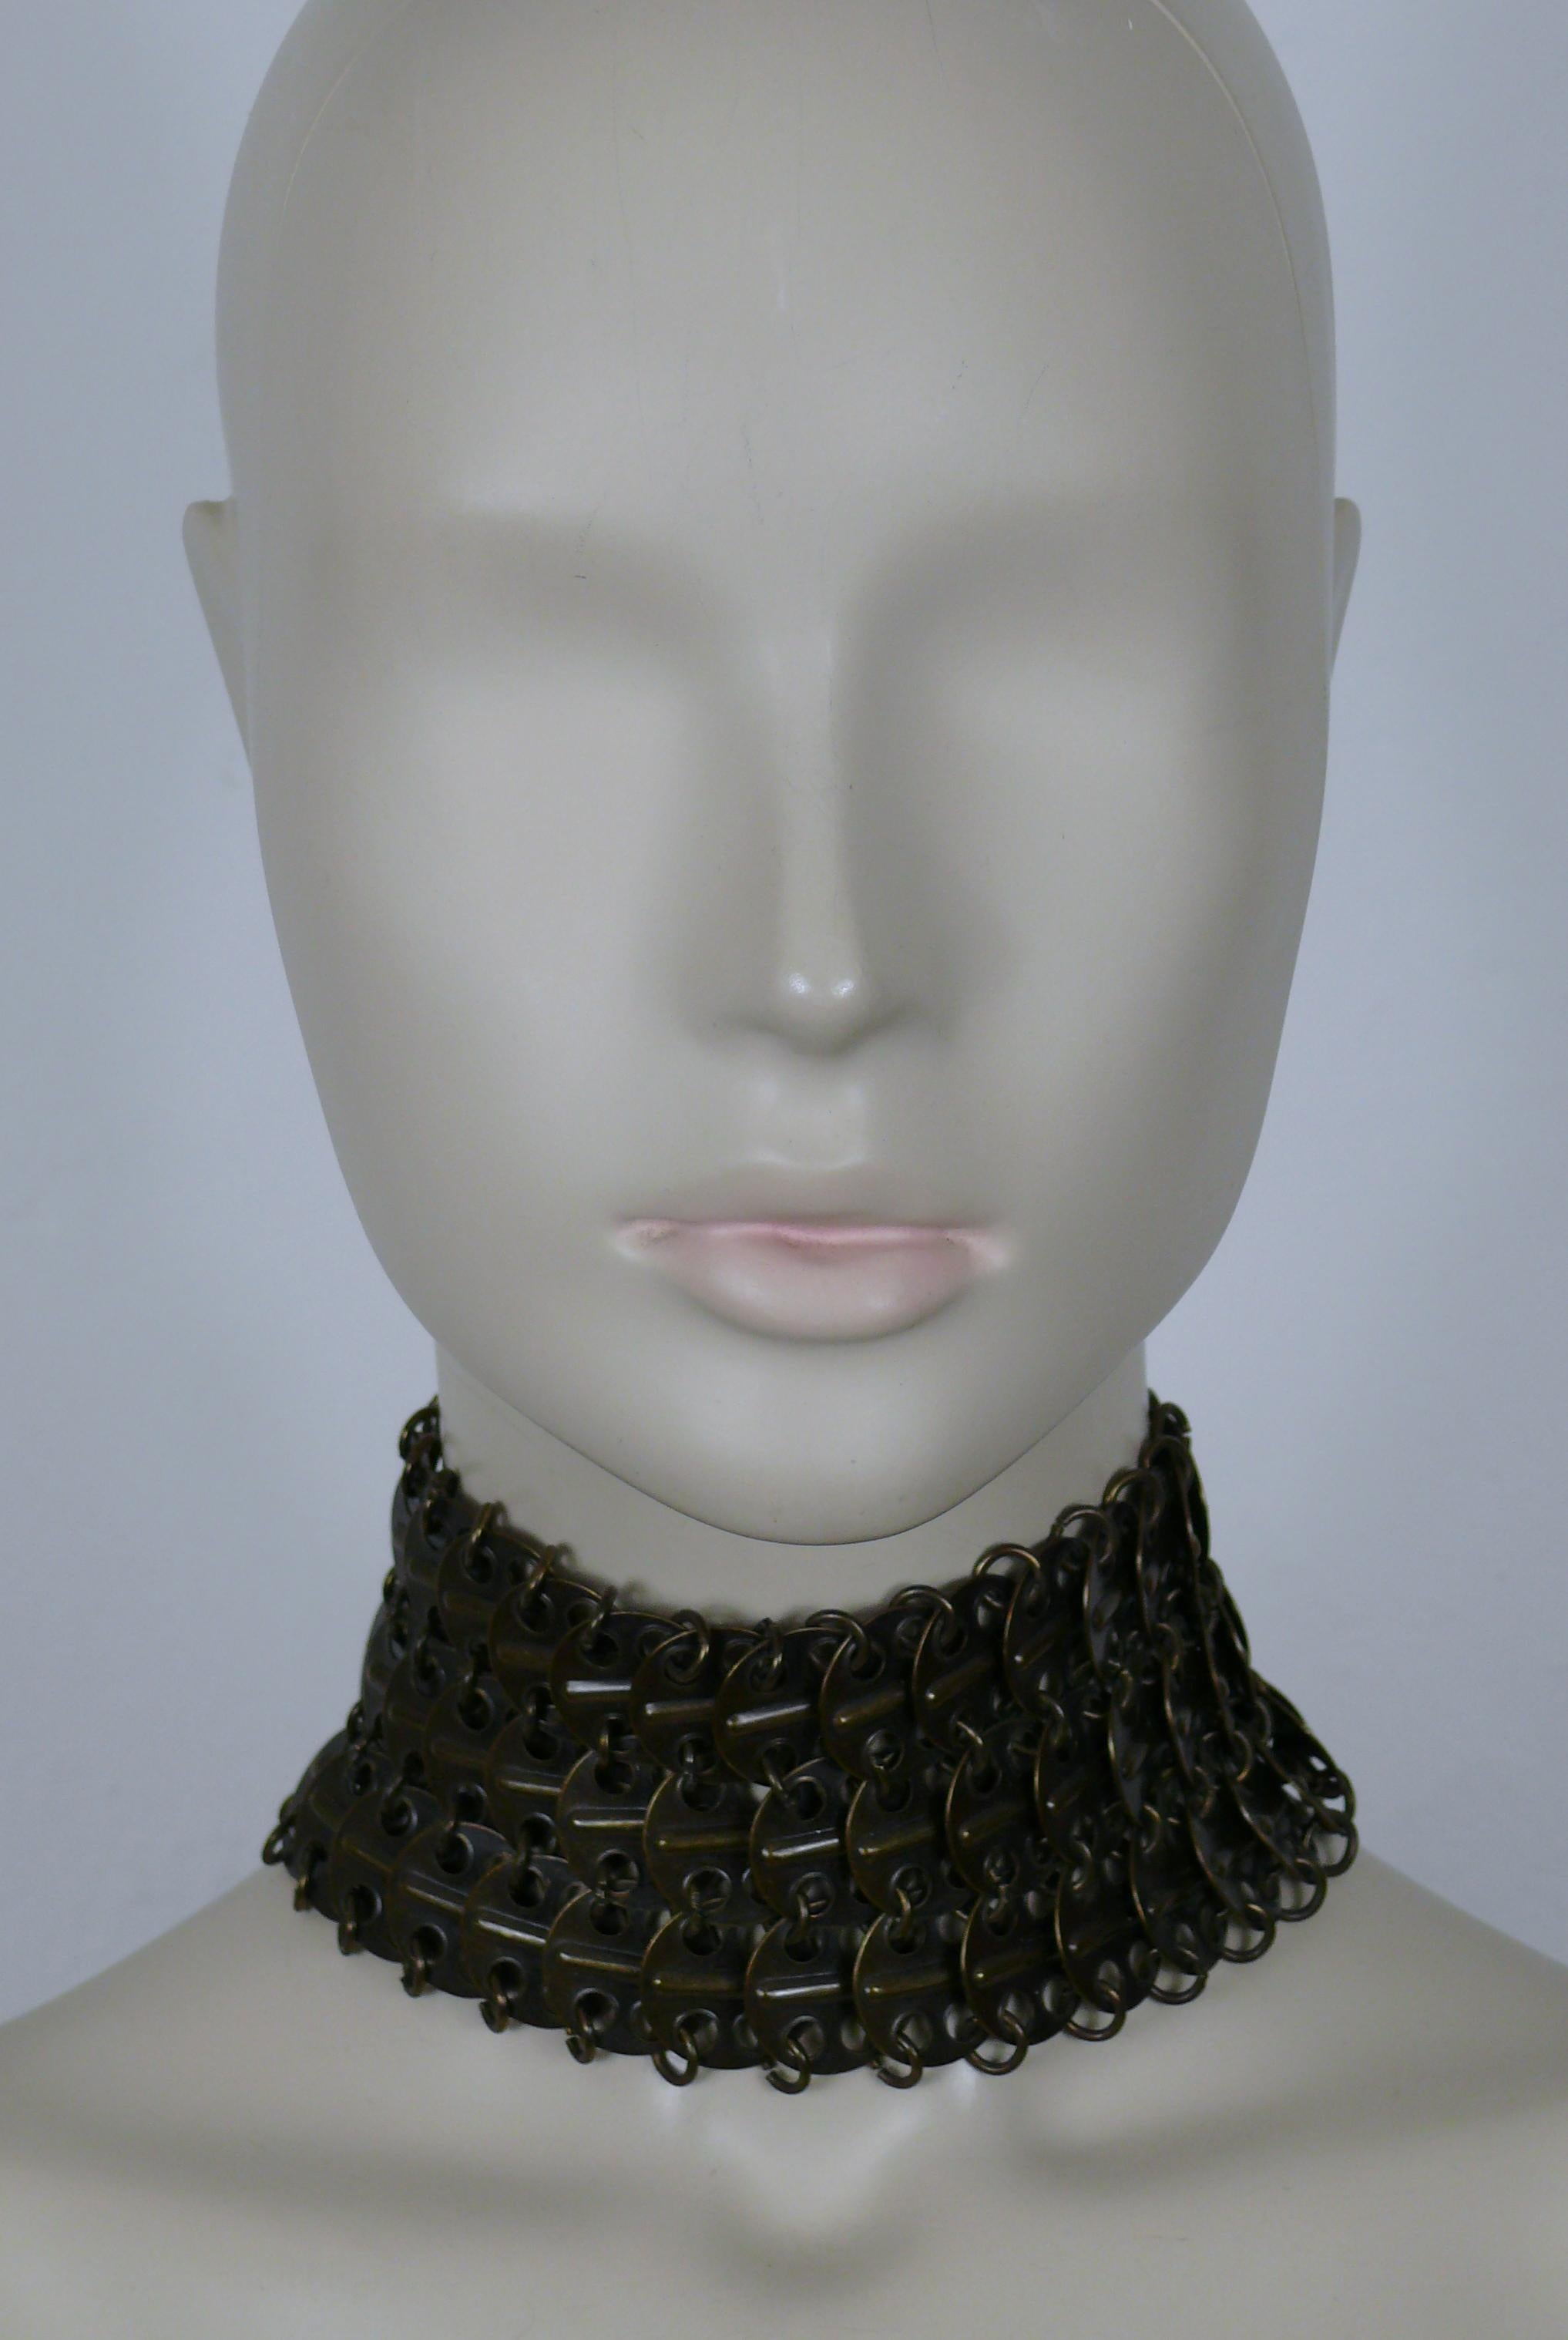 YVES SAINT LAURENT antiqued bronze tone chainmail choker necklace.

Hook clasp closure.
Adjustable length.

YSL logo charm.

Indicative measurements : adjustable length from approx. 33 cm (12.99 inches) to approx. 40 cm (15.55 inches) / width